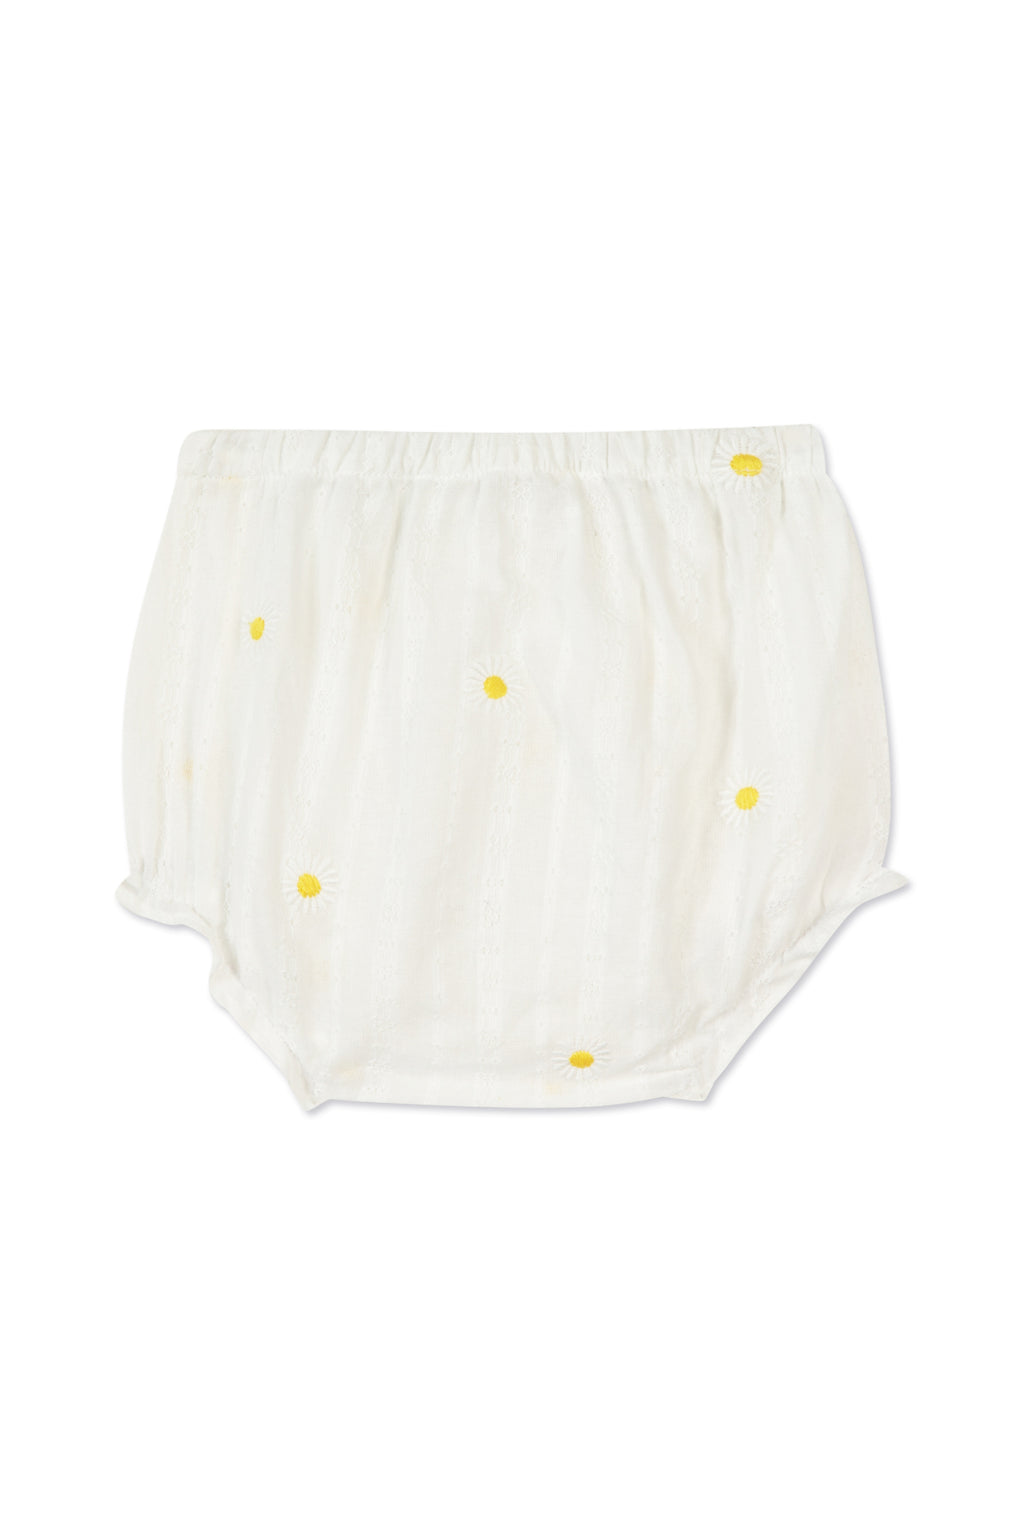 Outfit short - White margueres Embroideredes